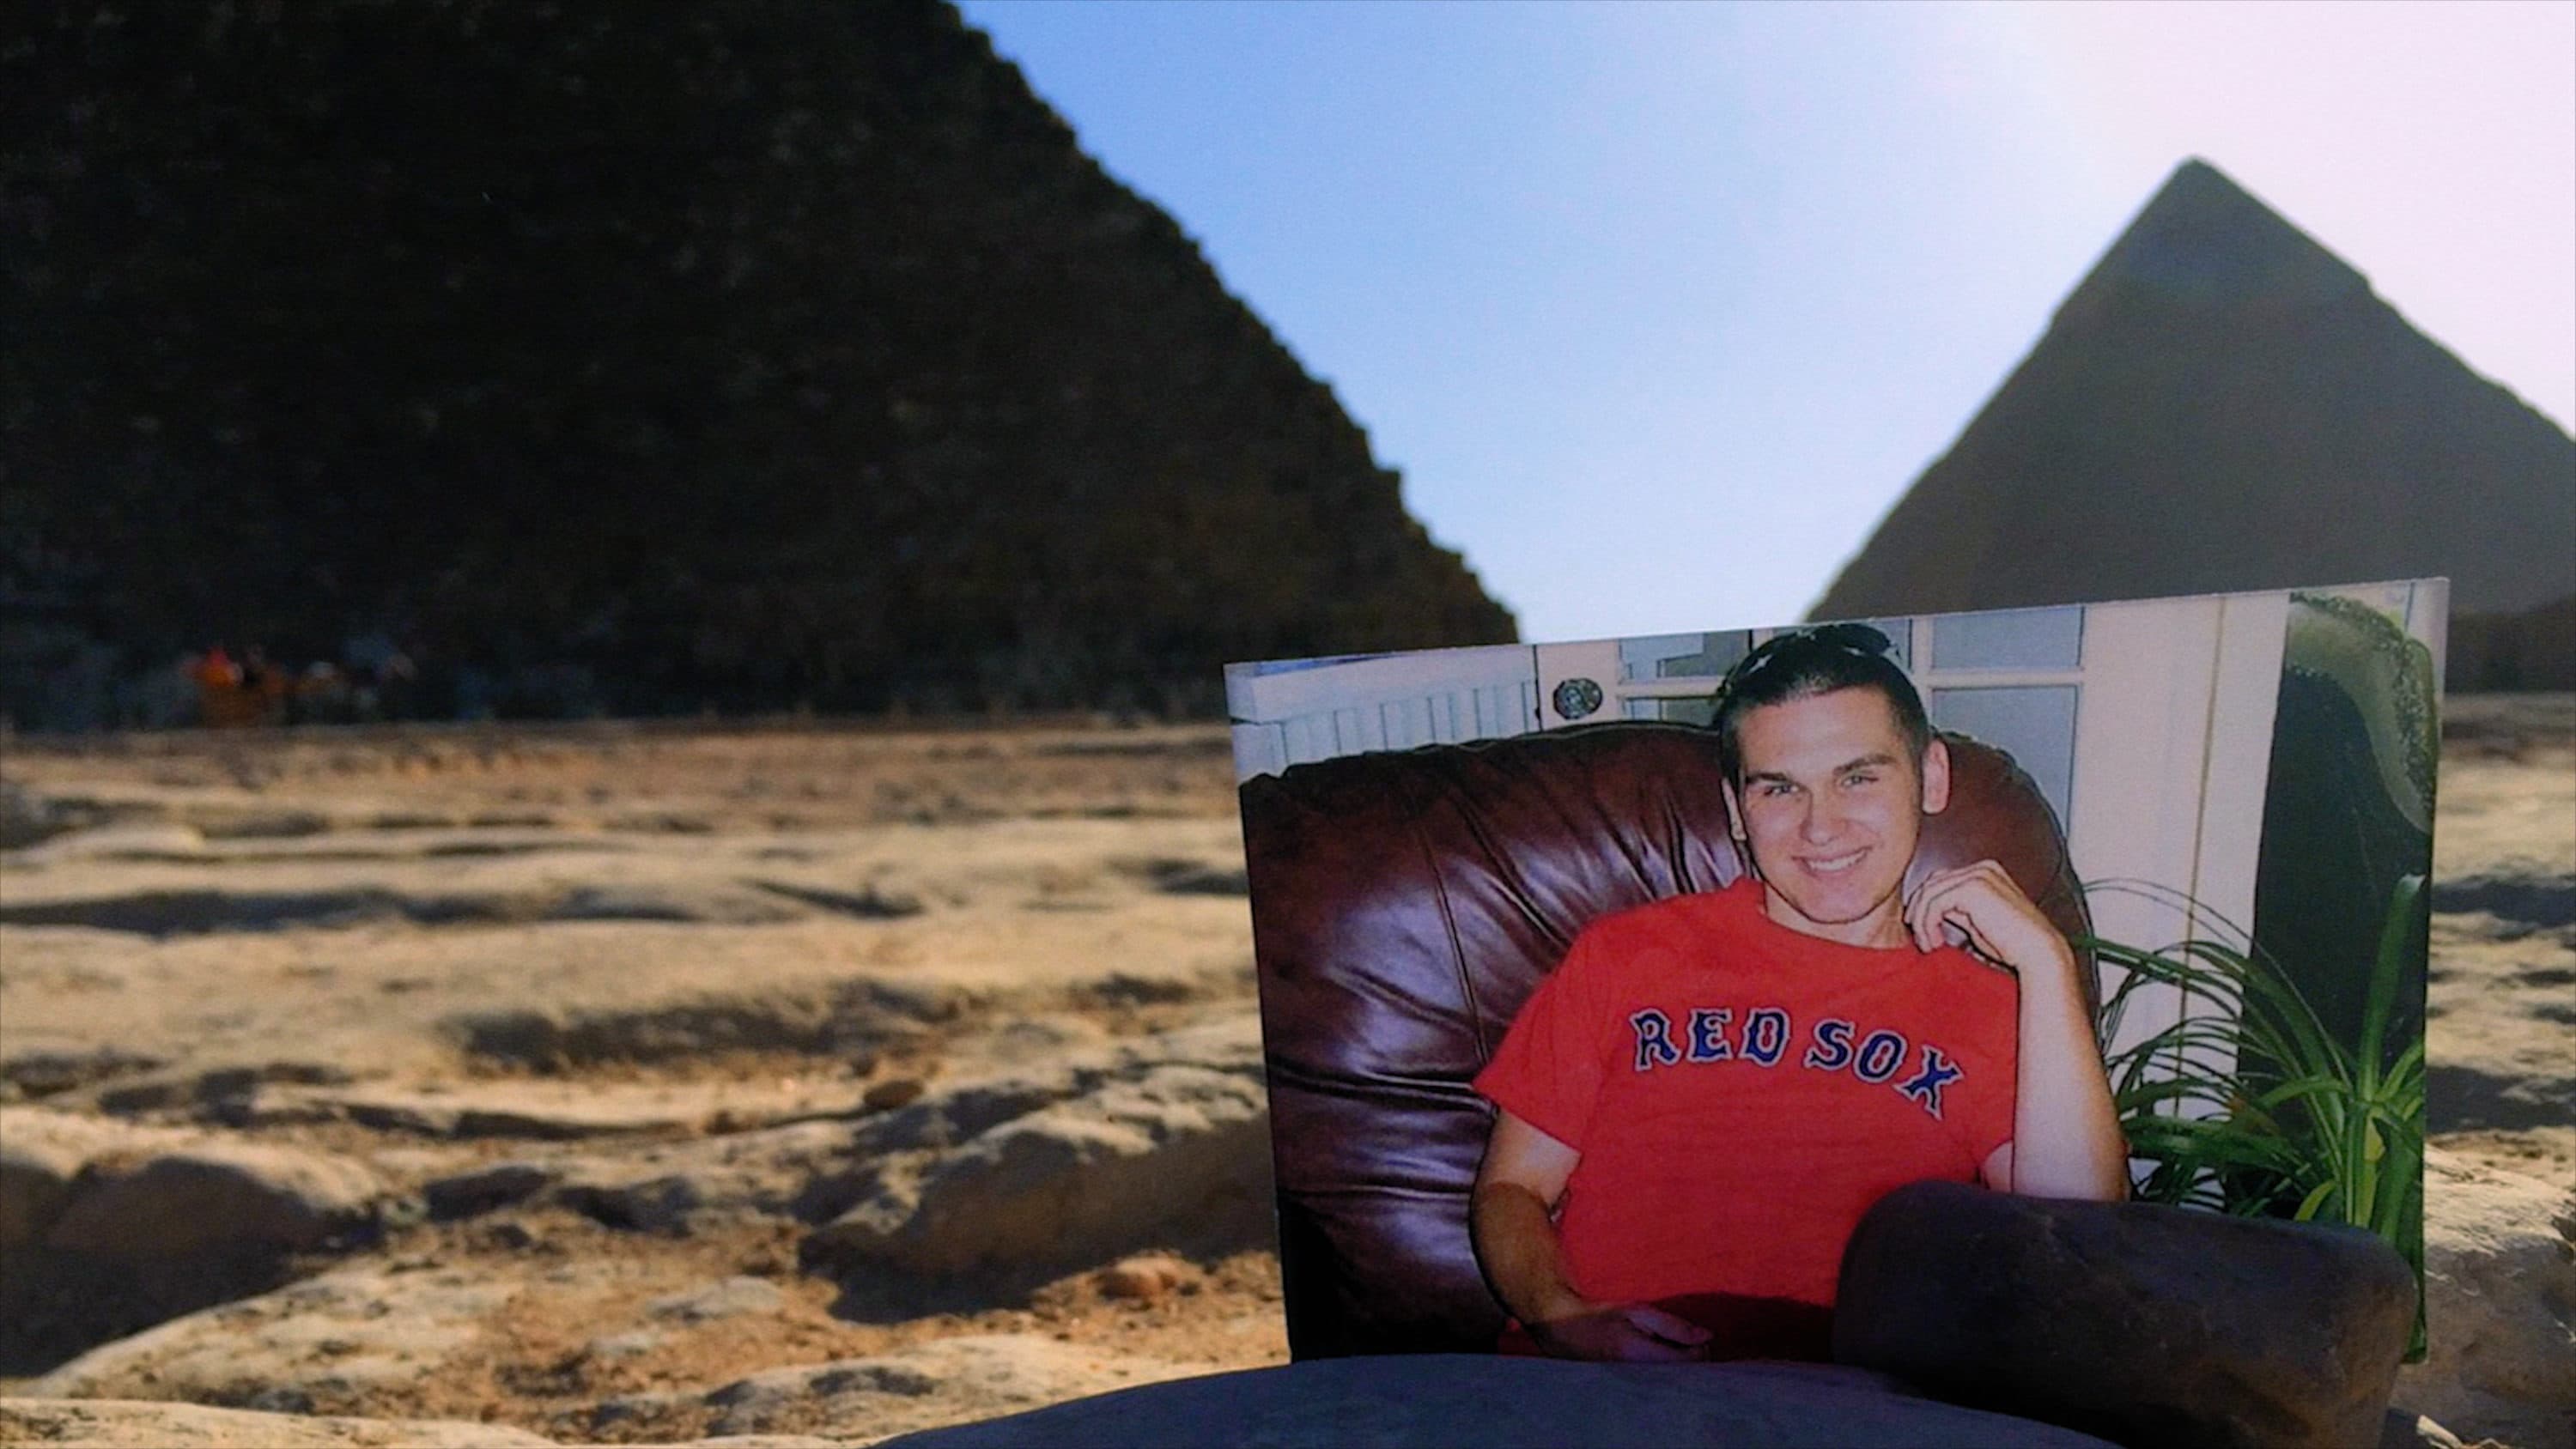 A photograph of CJ in front of the Pyramid of Giza. (Courtesy Spark Media)